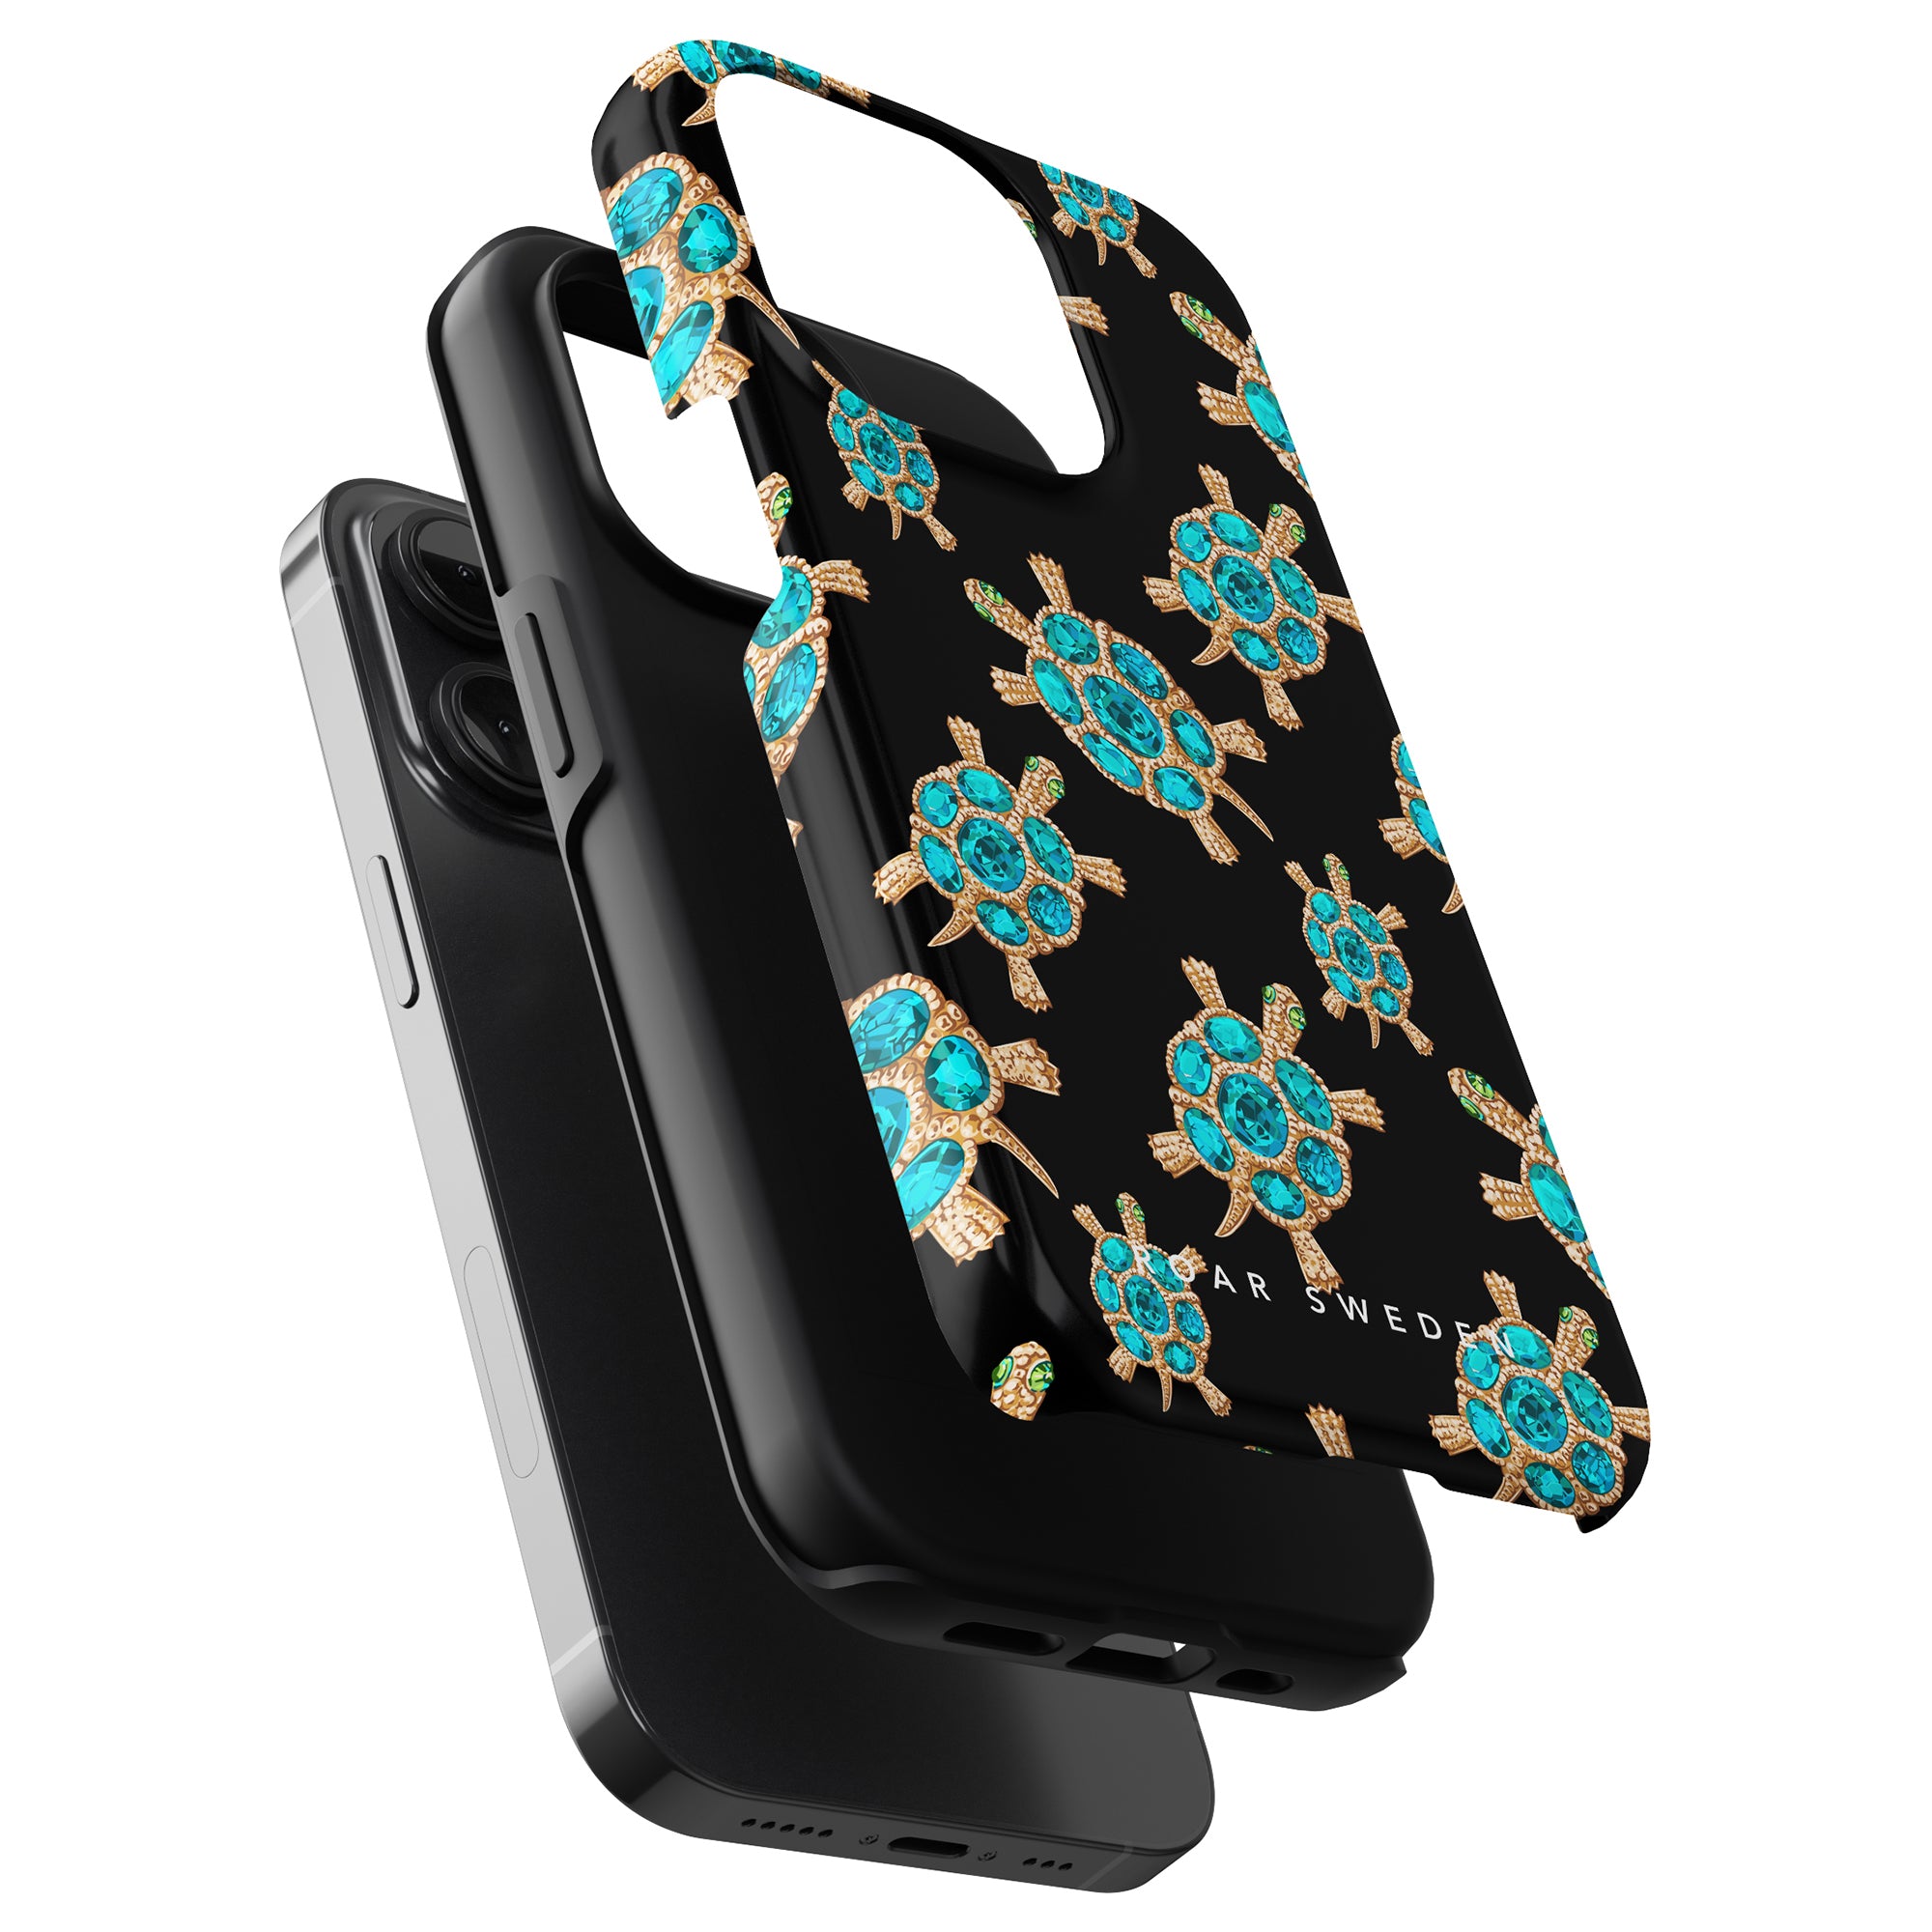 Black smartphone with a decorative Diamond Turtle - Tough Case from the ROAR SWEDEN Ocean Collection featuring turquoise flower patterns attached to a wireless charging device.